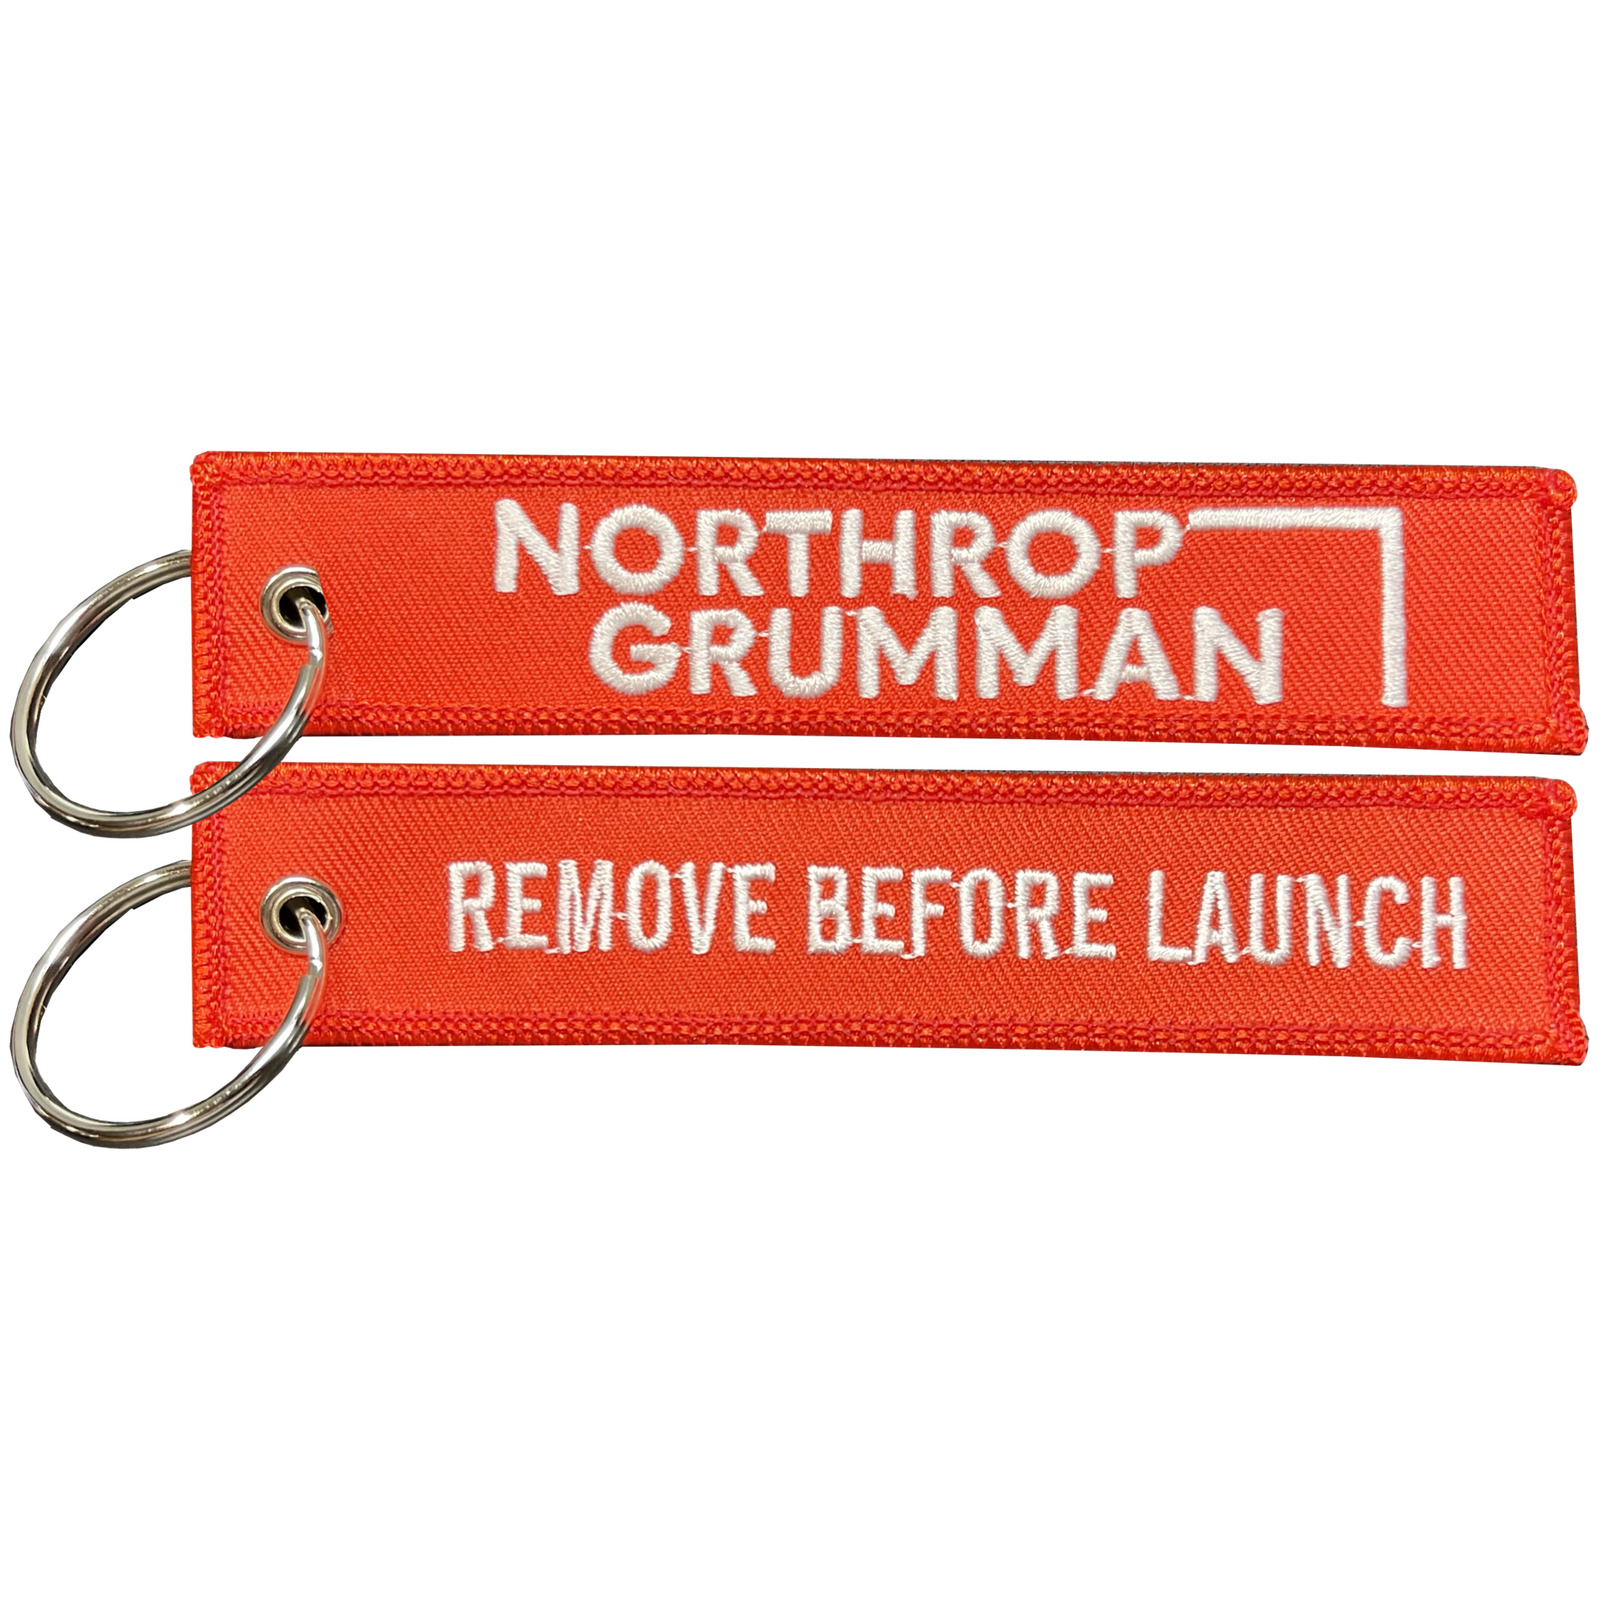 Northrop Grumman REMOVE BEFORE LAUNCH Keychain or Luggage Tag or zipper pull Spa